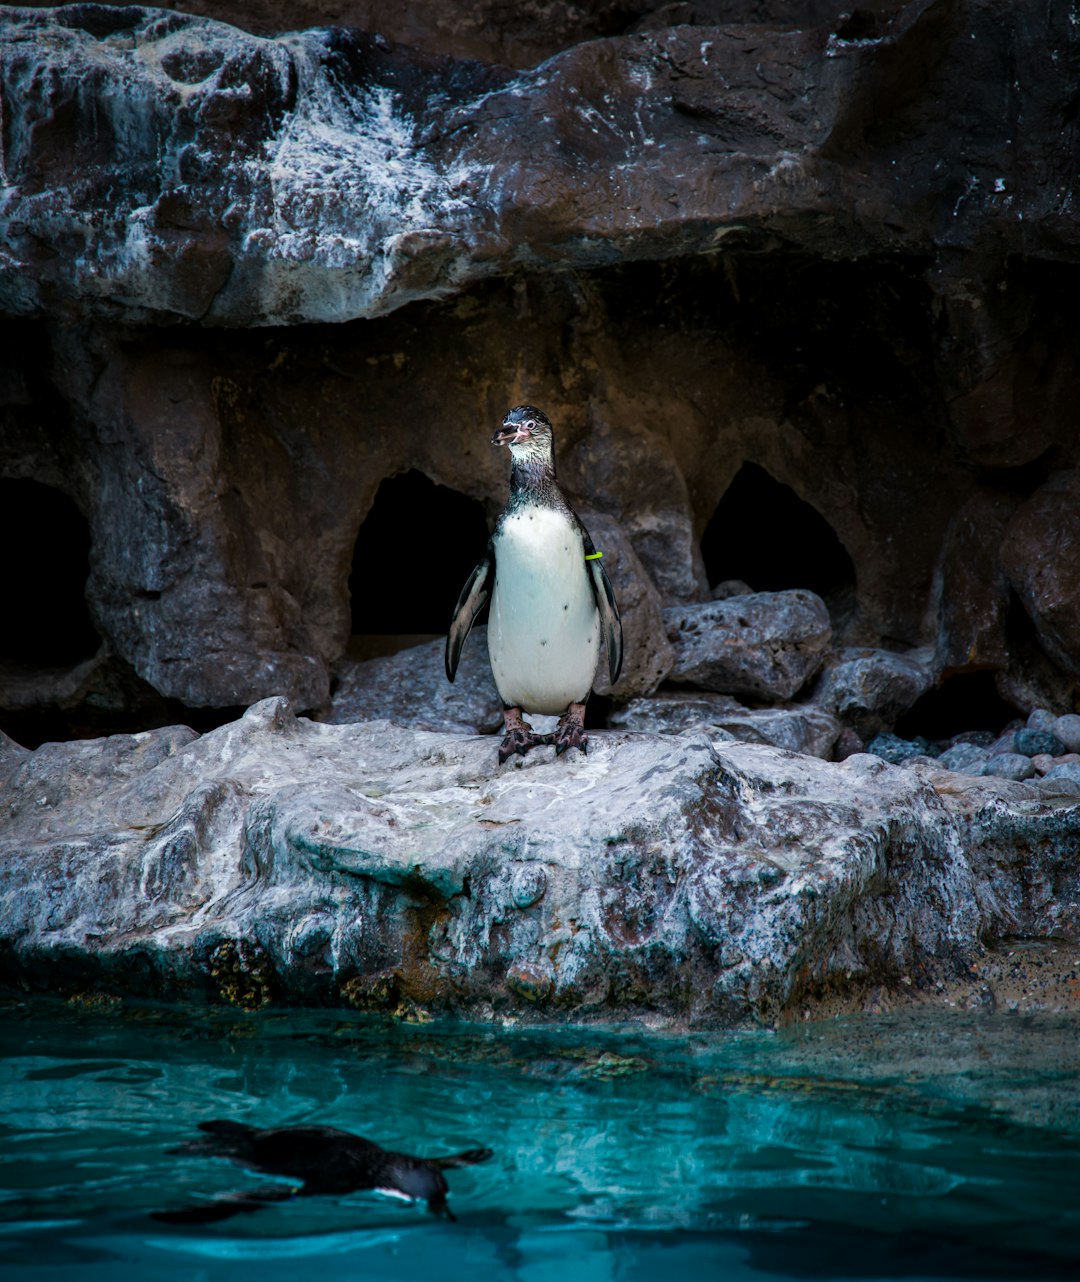 2 penguins standing on rock formation near body of water during daytime